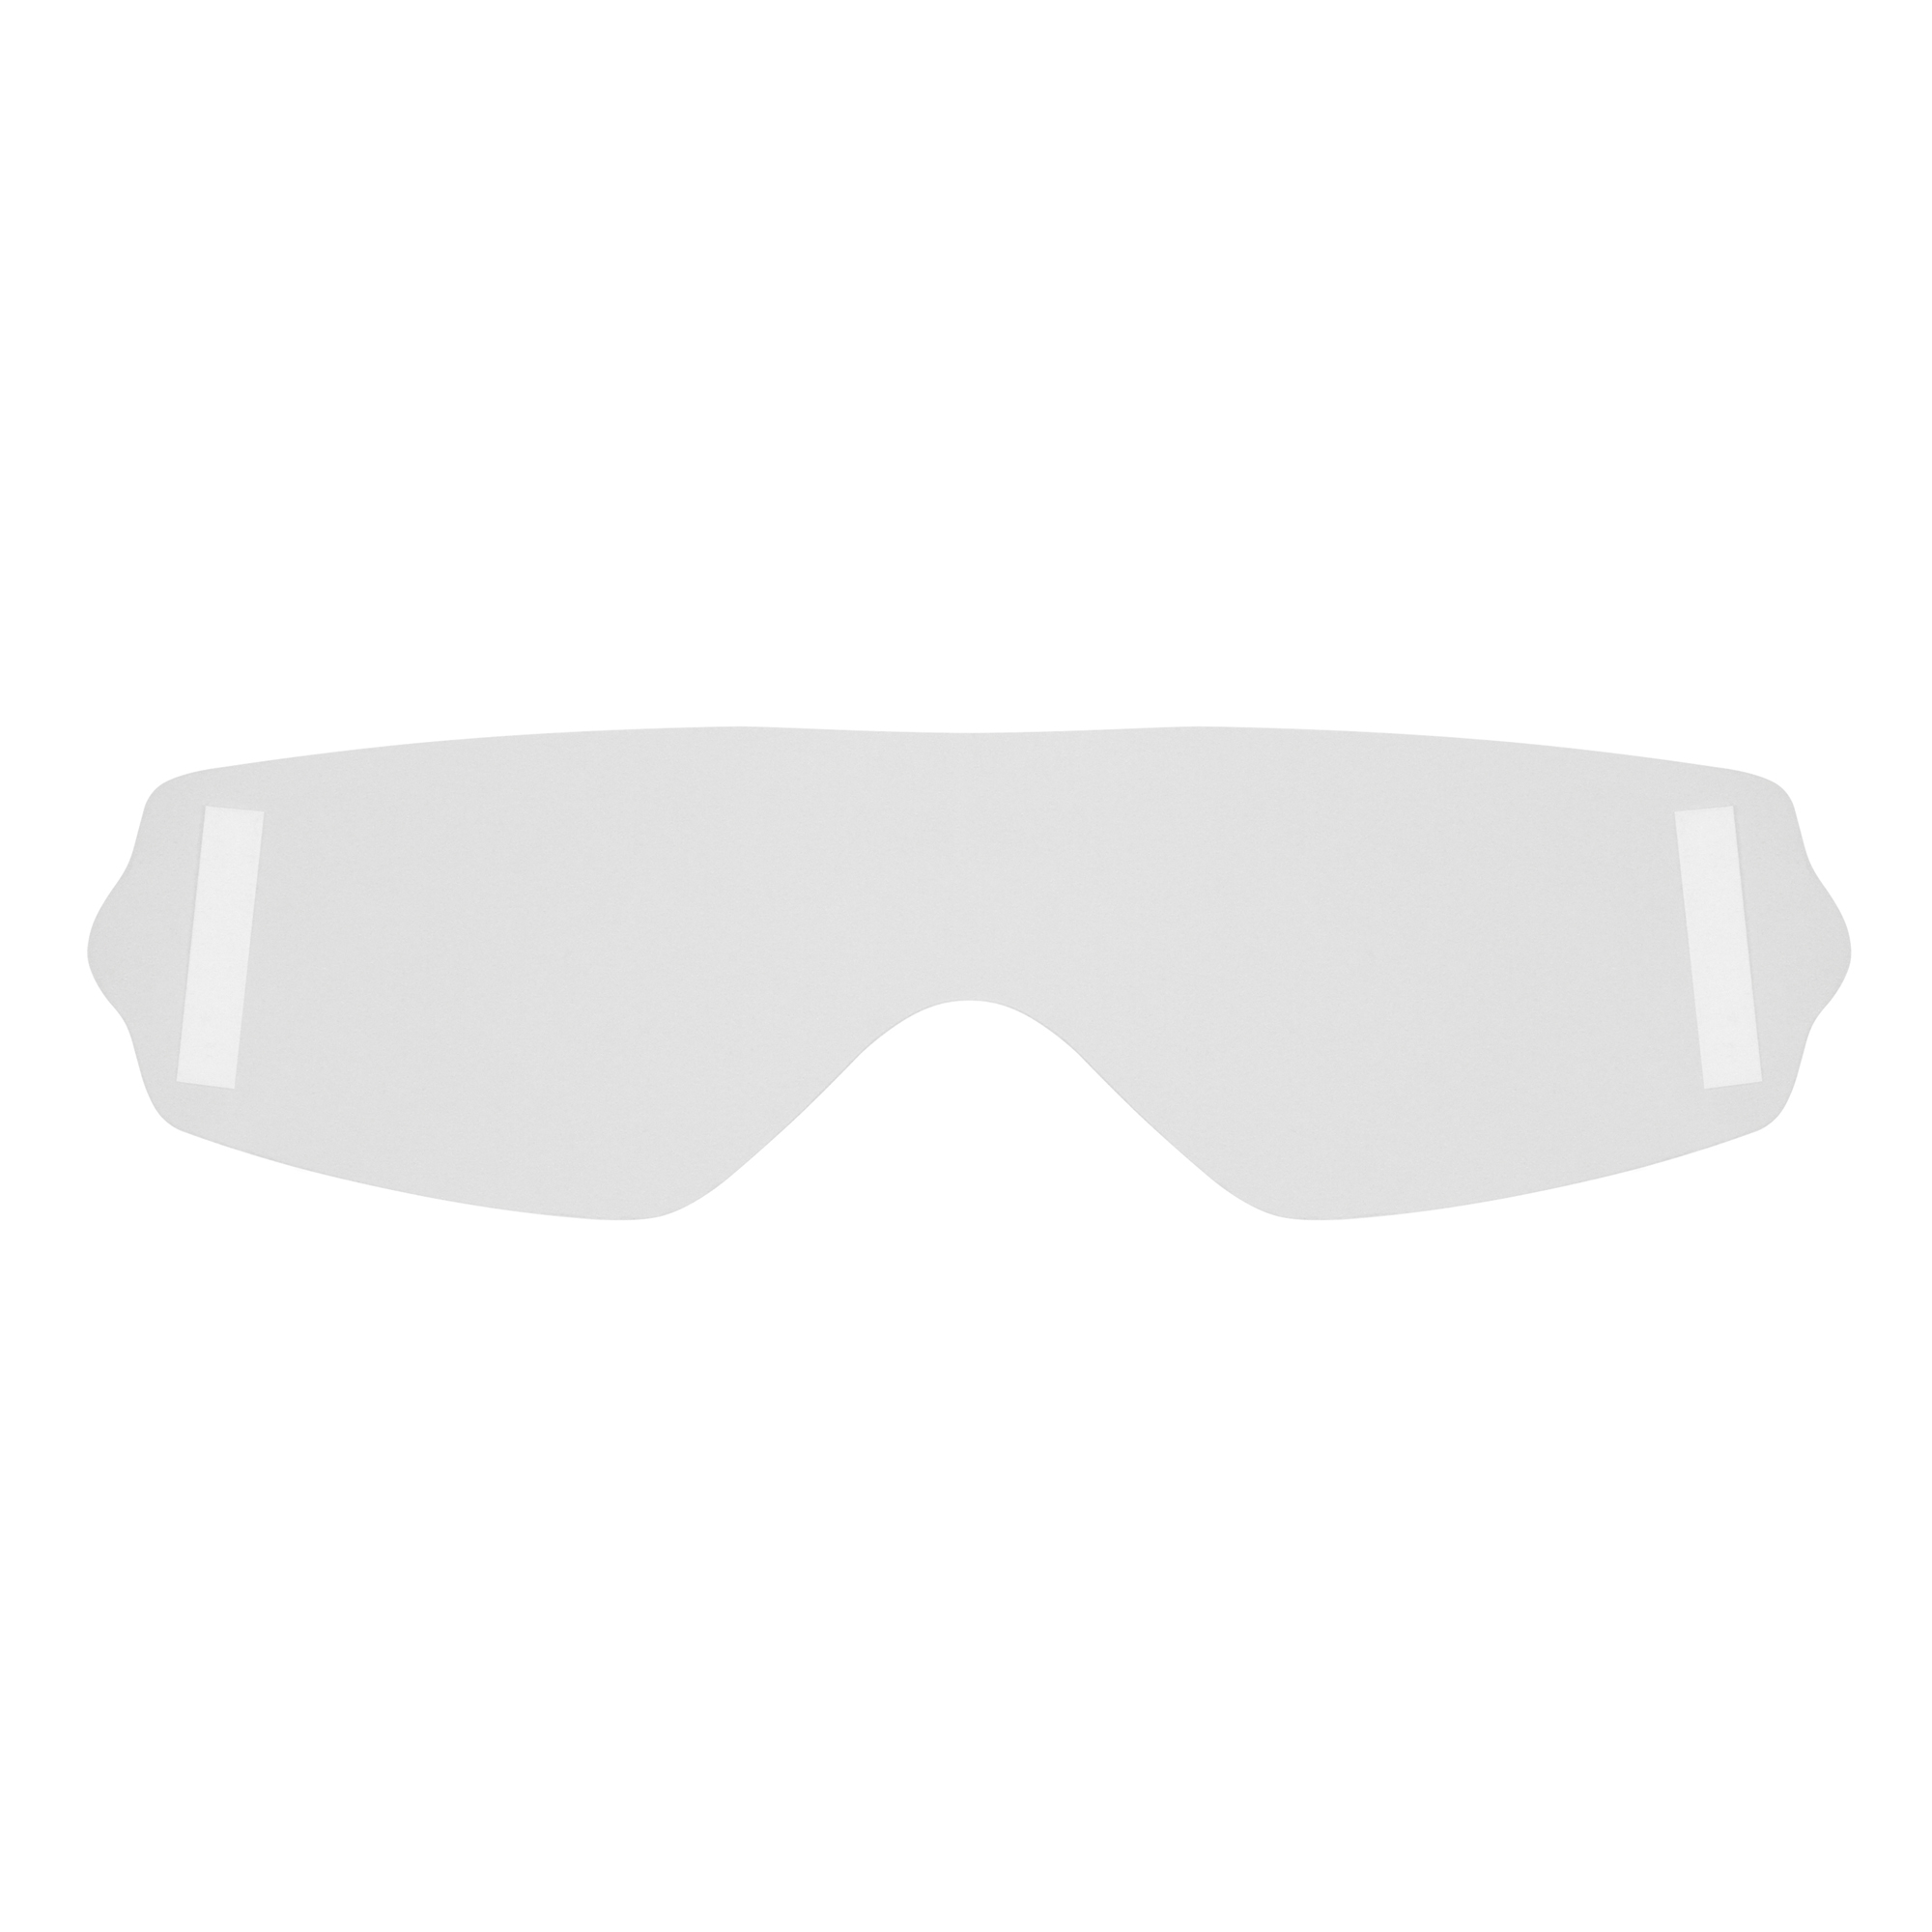 Peel Off Covers for EVO® / Thermex™ Safety Goggles - Pack of 10